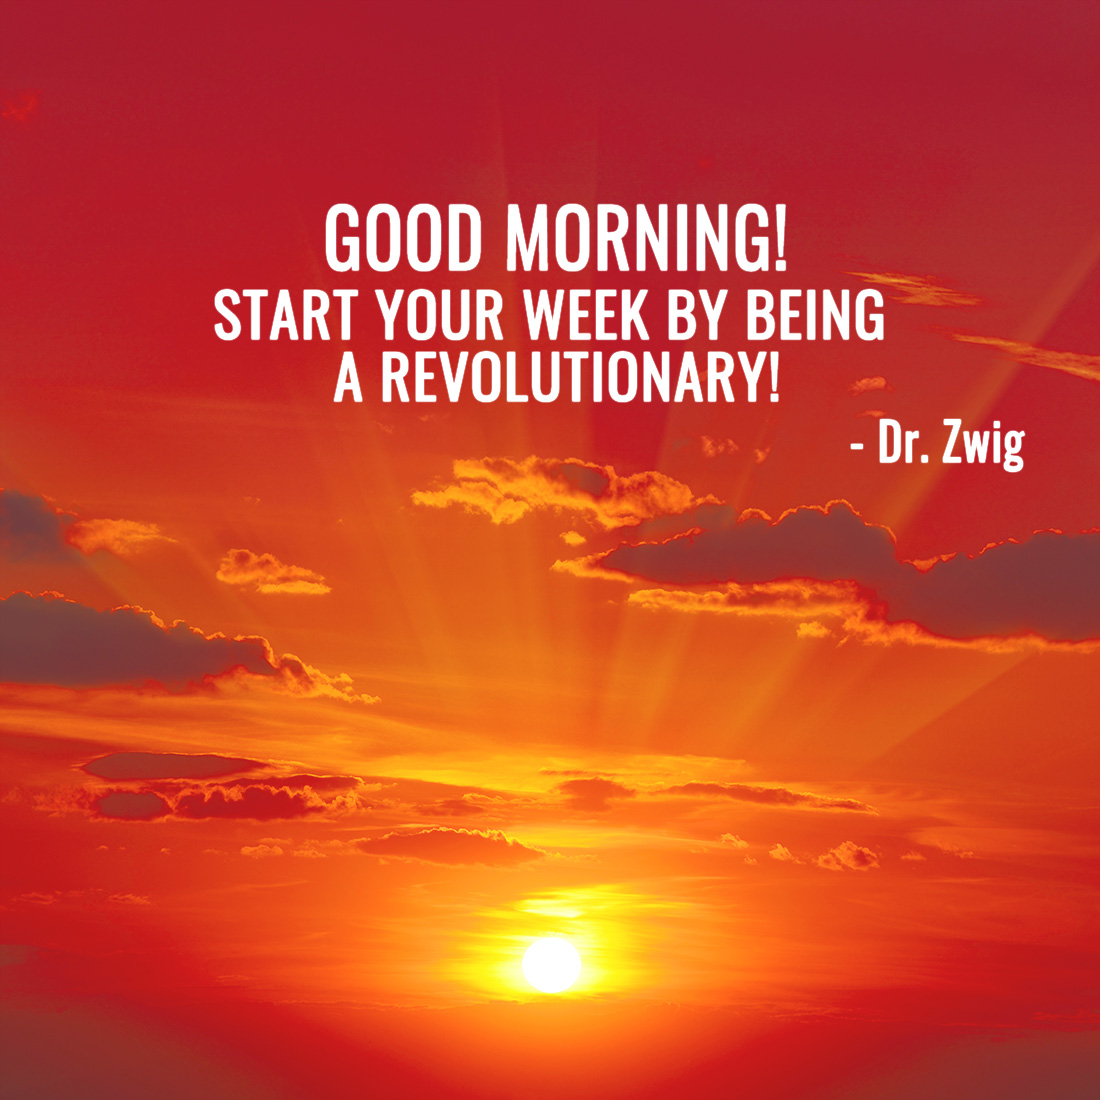 Start your week by being a revolutionary!